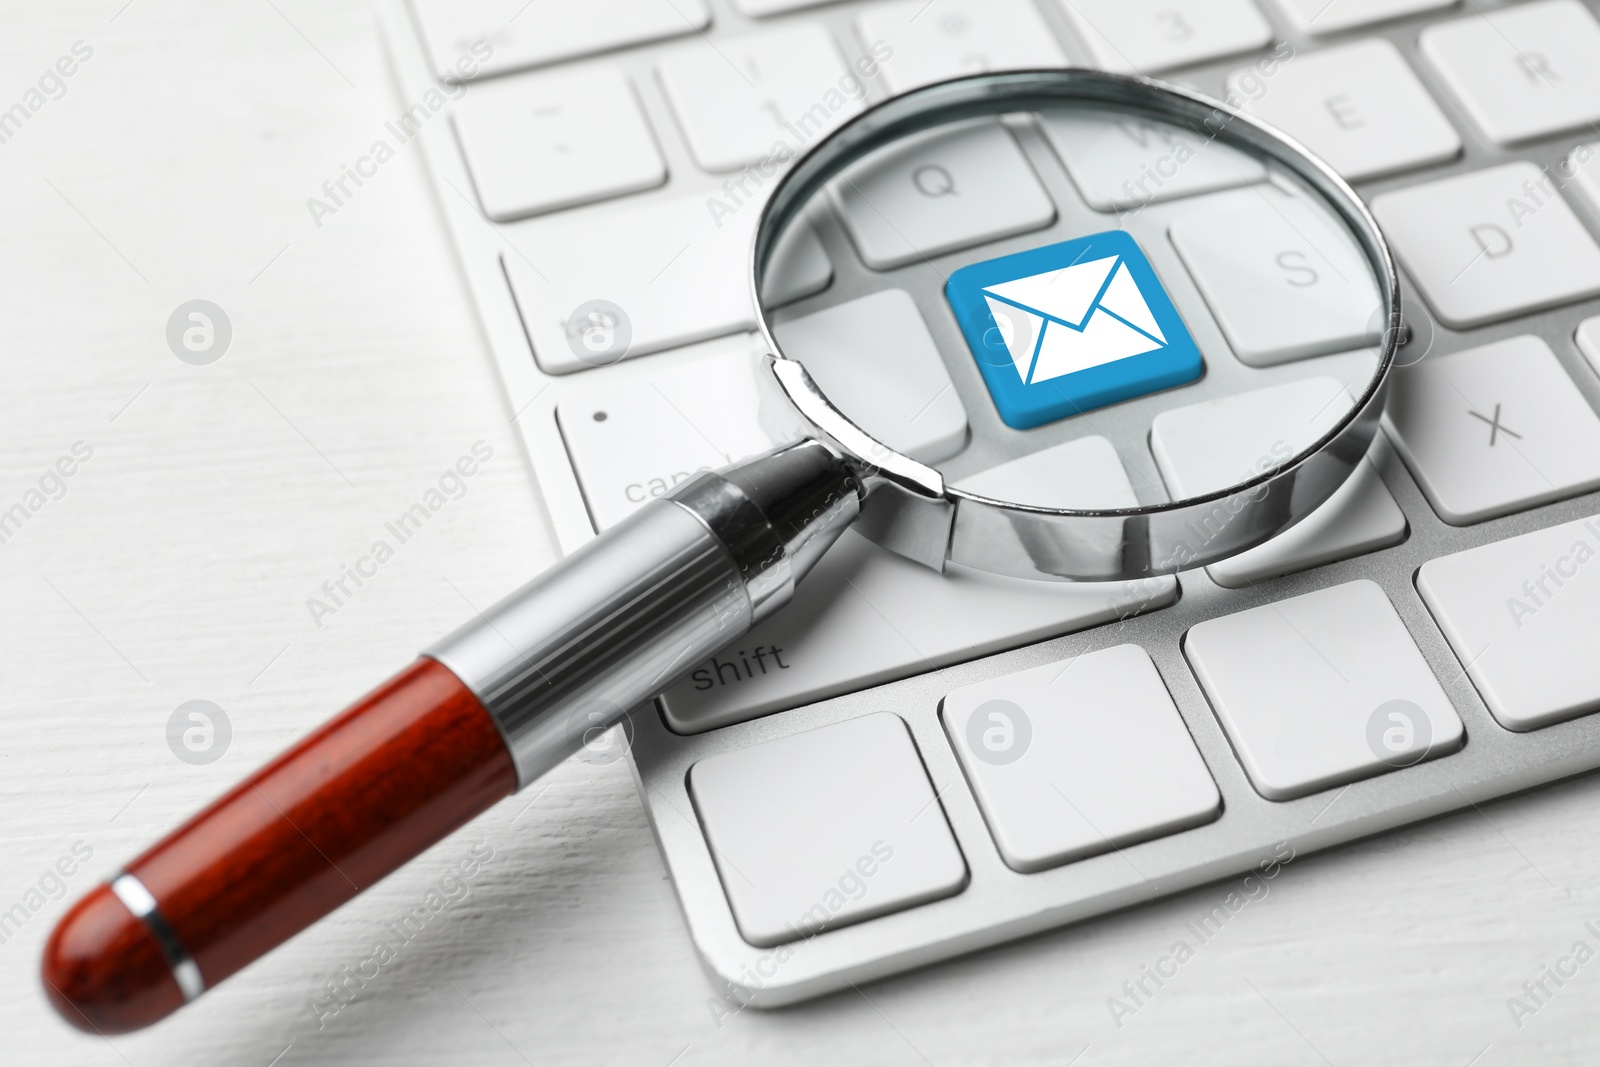 Image of Email. Light blue button with illustration of envelope on computer keyboard, view through magnifying glass, closeup